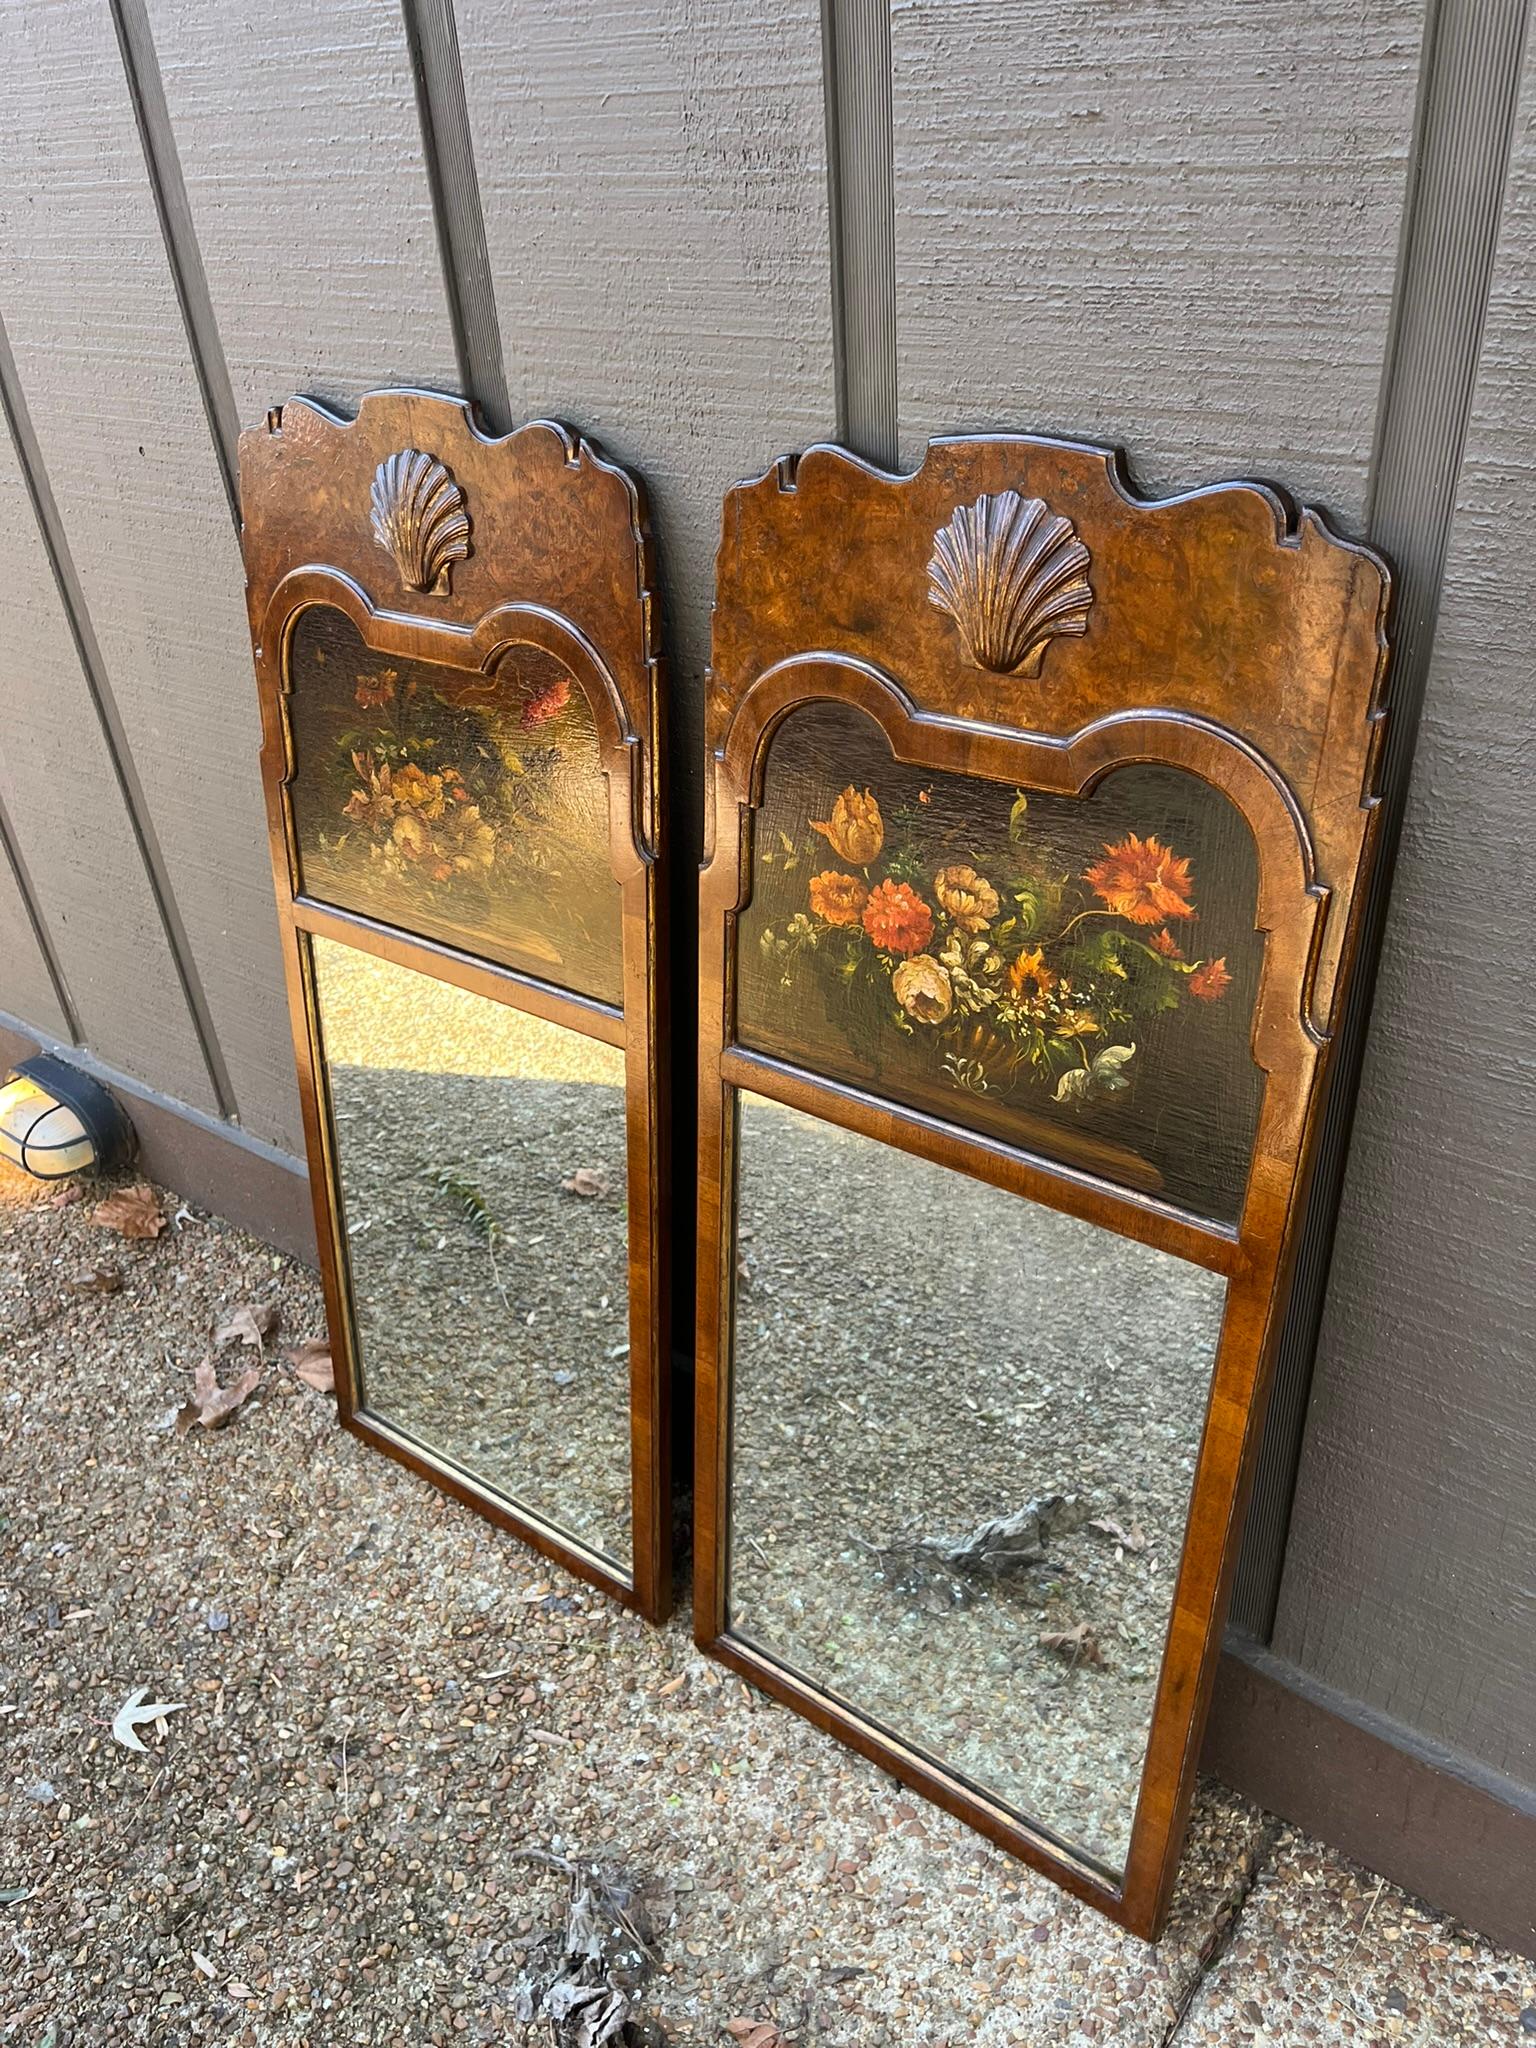 Walnut and burl walnut with gilt highlights looking glasses. The scalloped crest with a carved centralized shell. Each with a floral painted on board , inset above lightly distressed mirror plates.
A hard to find pair or set in the style of the 18th